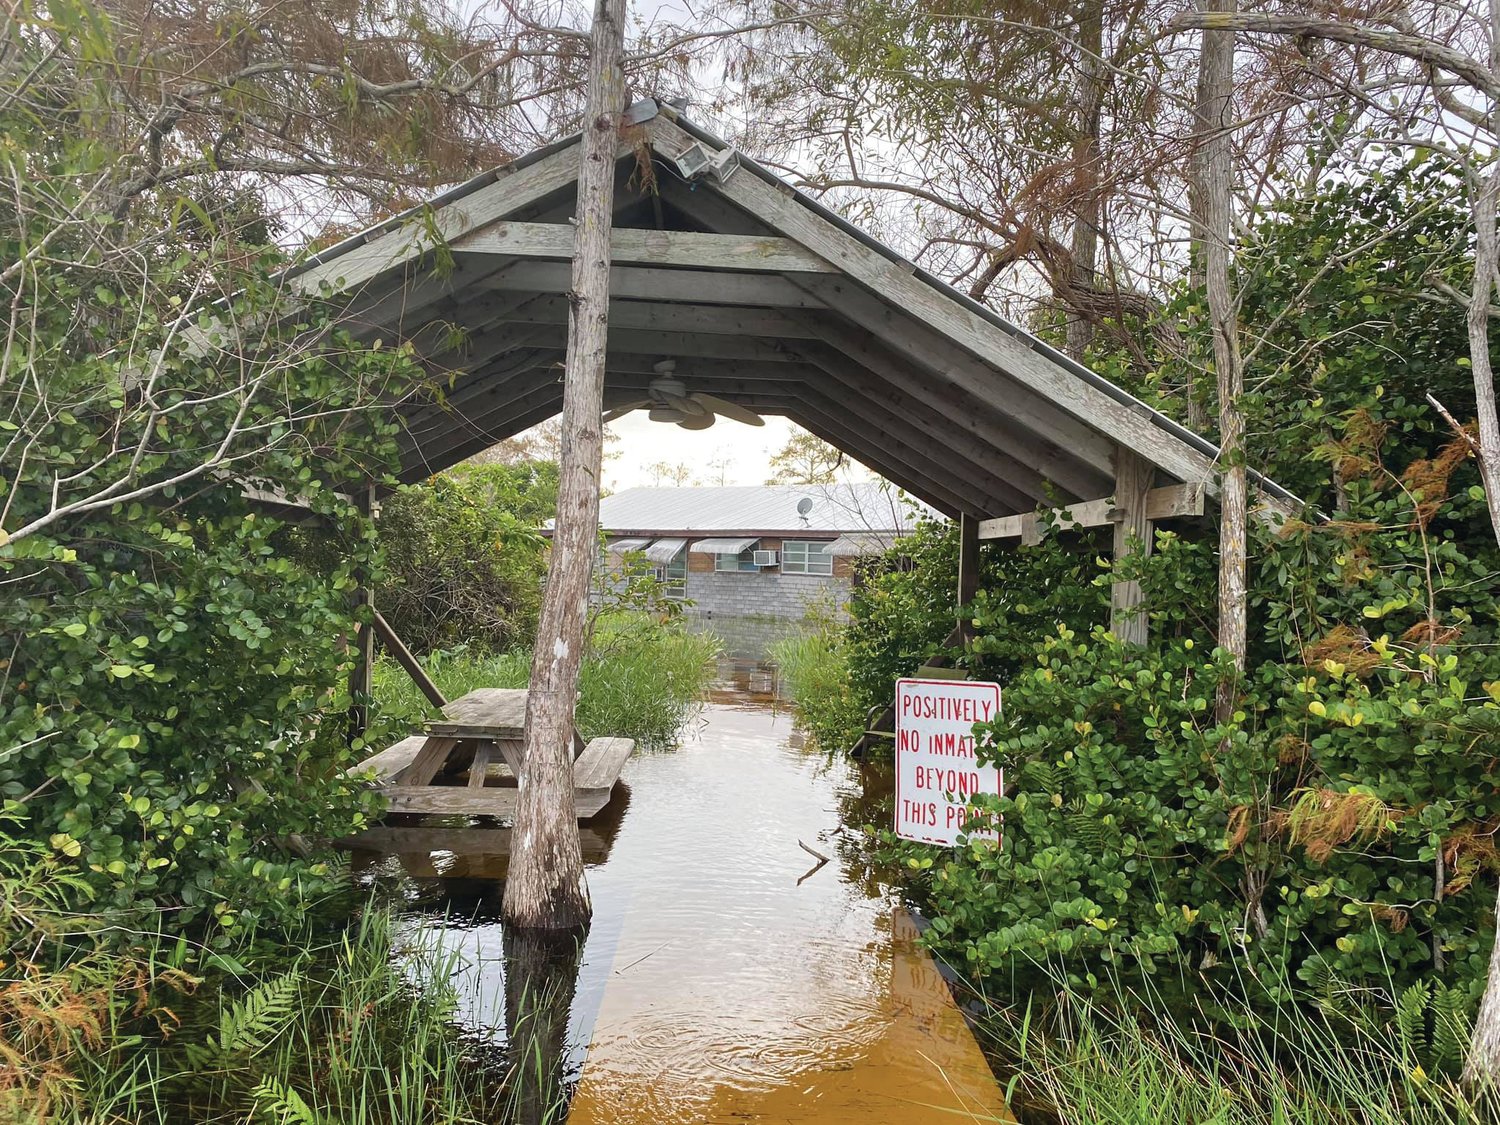 Historic camps in the Everglades are underwater. Water is backed up at the Tamiami Trail, which bisects the Everglades from Tampa to Miami. More conveyance under the road is needed to restore the historic sheetflow of the “River of Grass,” explained Osceola.